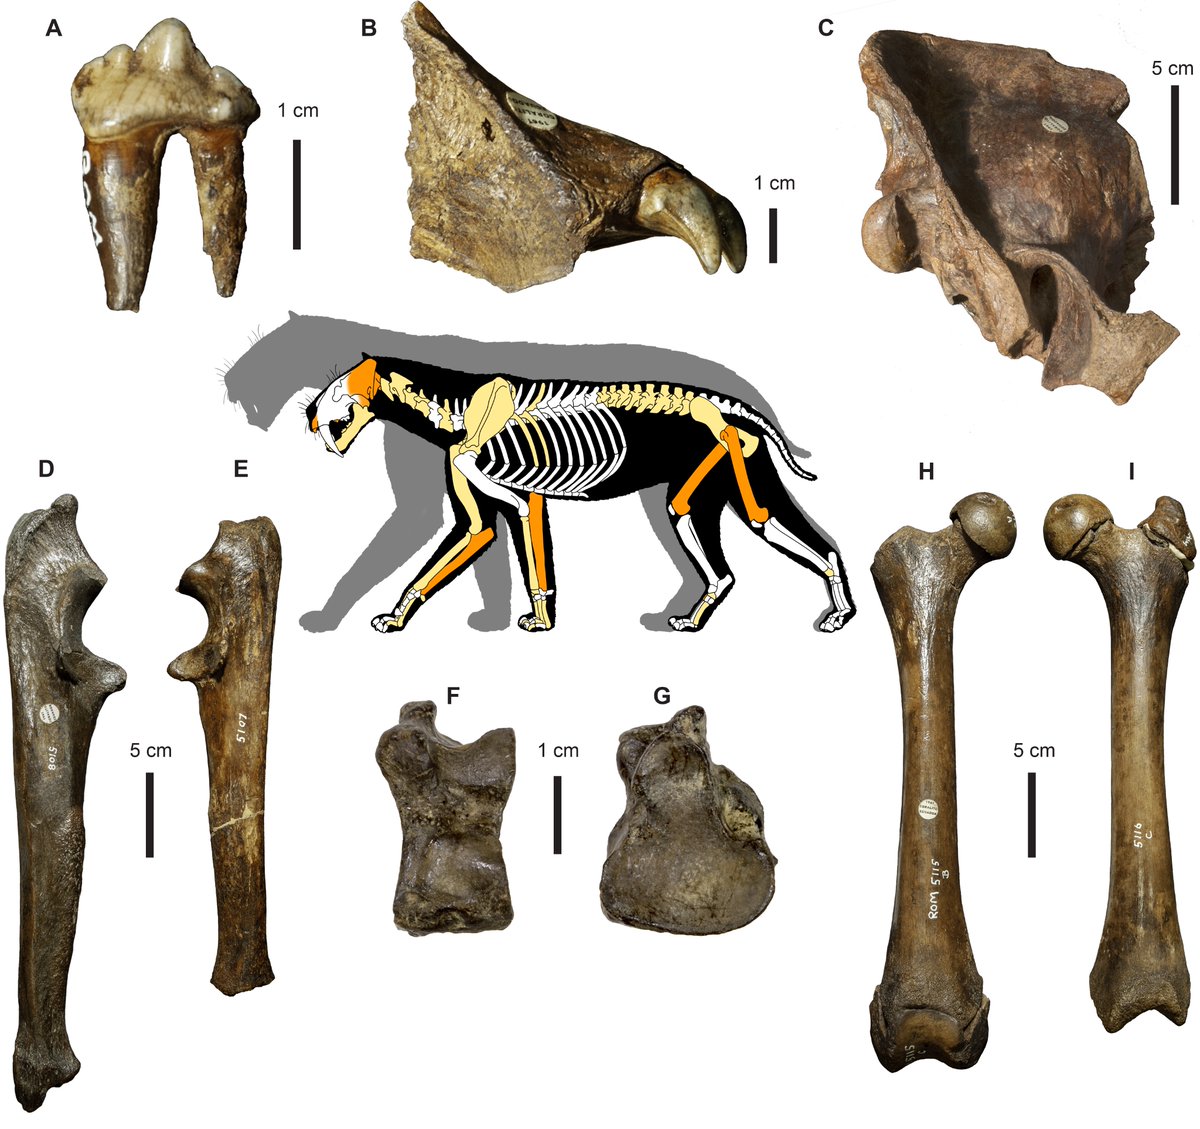 What we found was that the fossil assemblage, mostly dominated by ground sloths, was probably created during a catastrophic event. Among over 4,000 bones collected by  @ROMtoronto curators A.G. Edmund and R.R. Lemon, we identified 58 Smilodon fatalis elements.